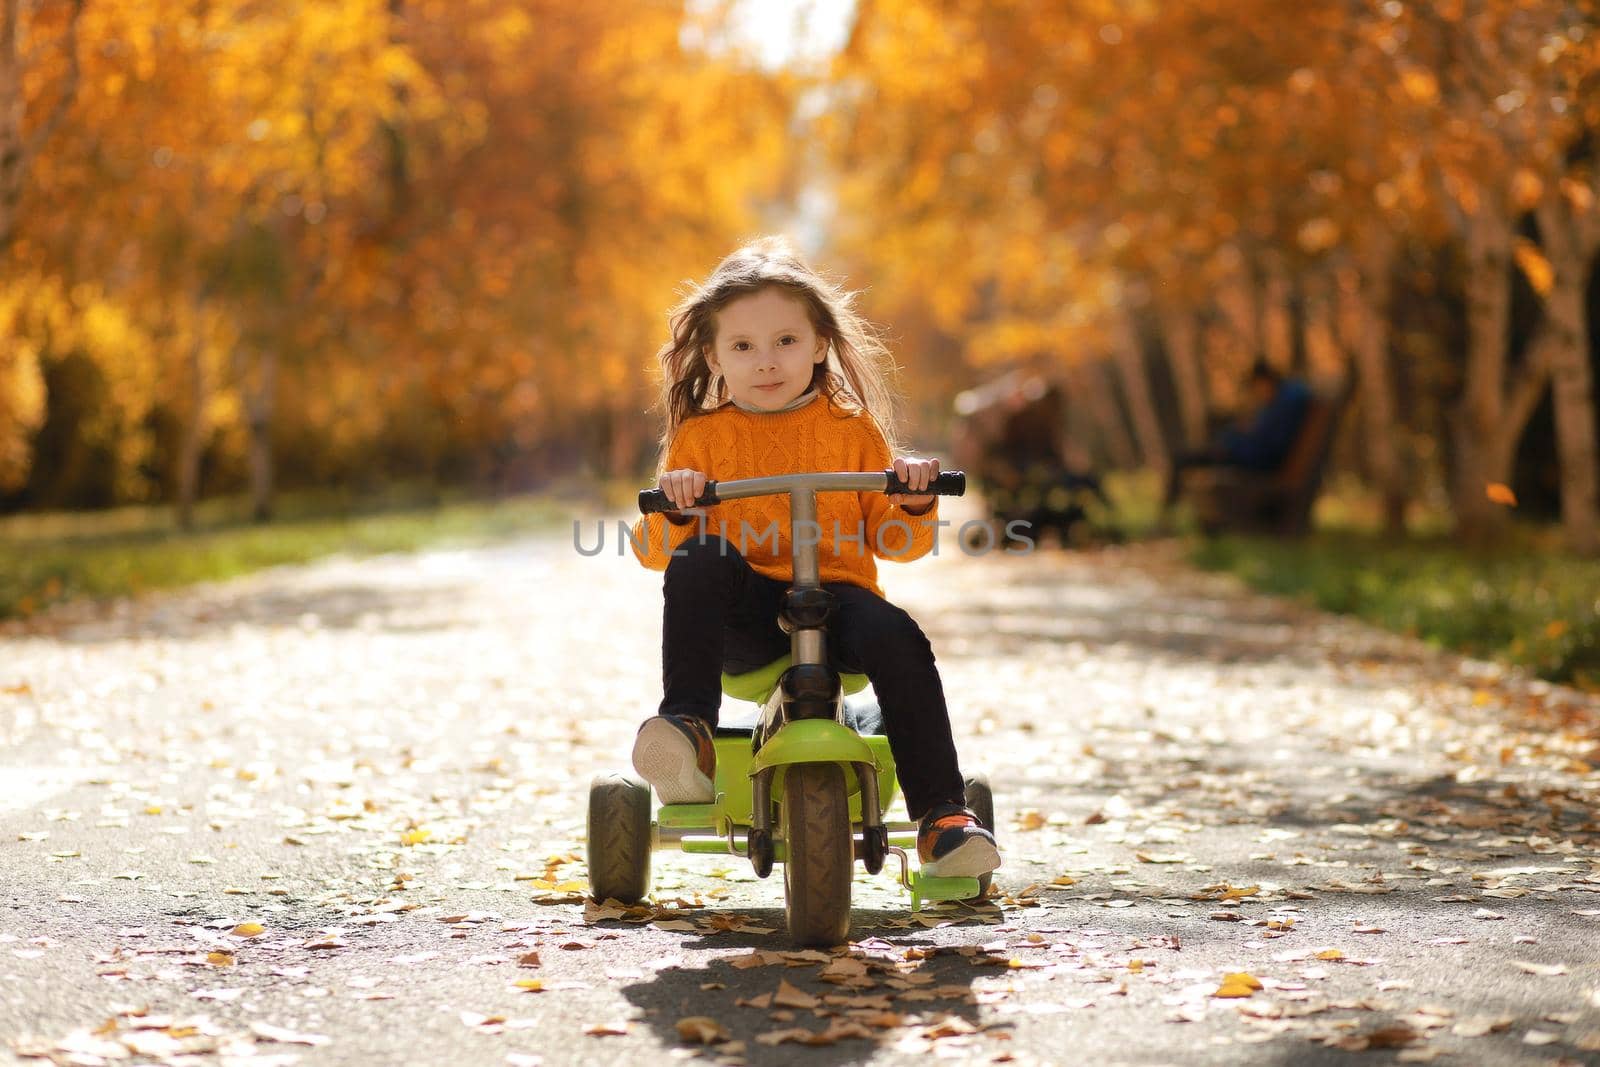 Little girl rides a 3-wheeled bike in the autumn park.